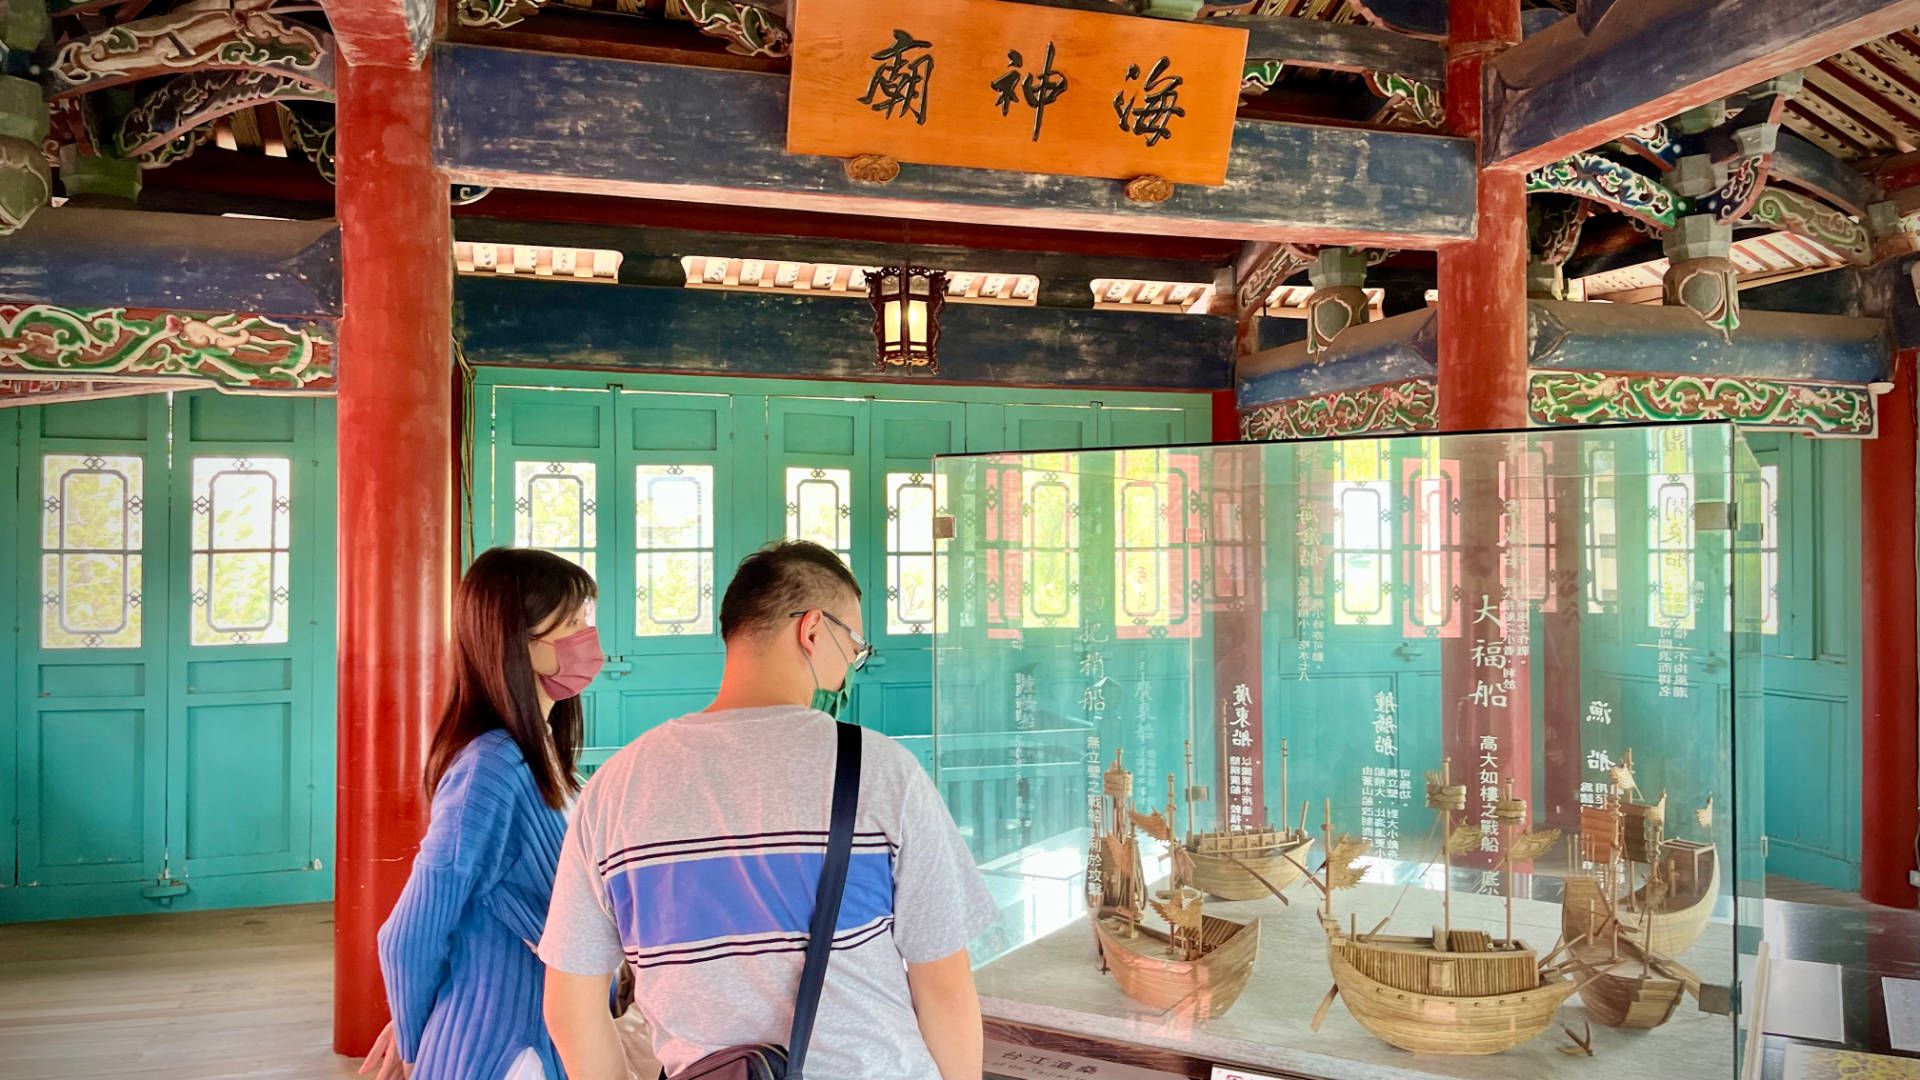 Inside the top floor of Chihkan Tower. Two people are looking at wooden models of historic ships in a glass case.